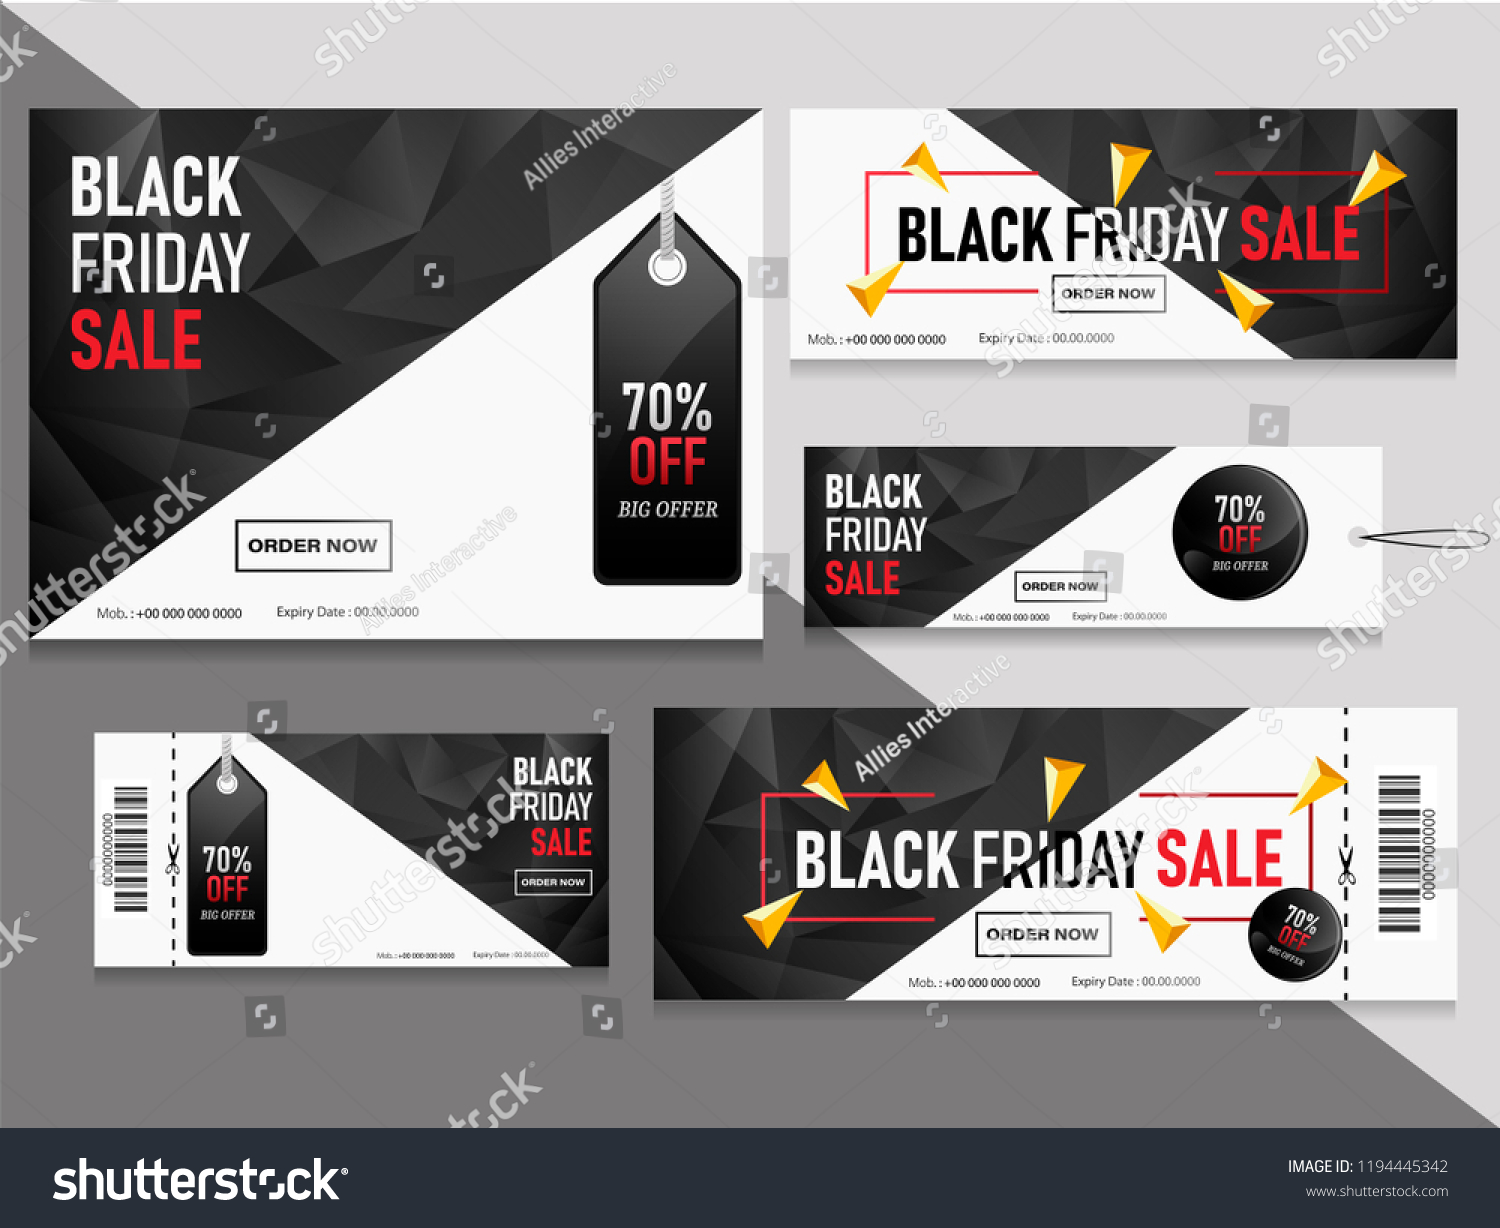 Black Friday sale coupons and vouchers set with 70% discount offer. #1194445342